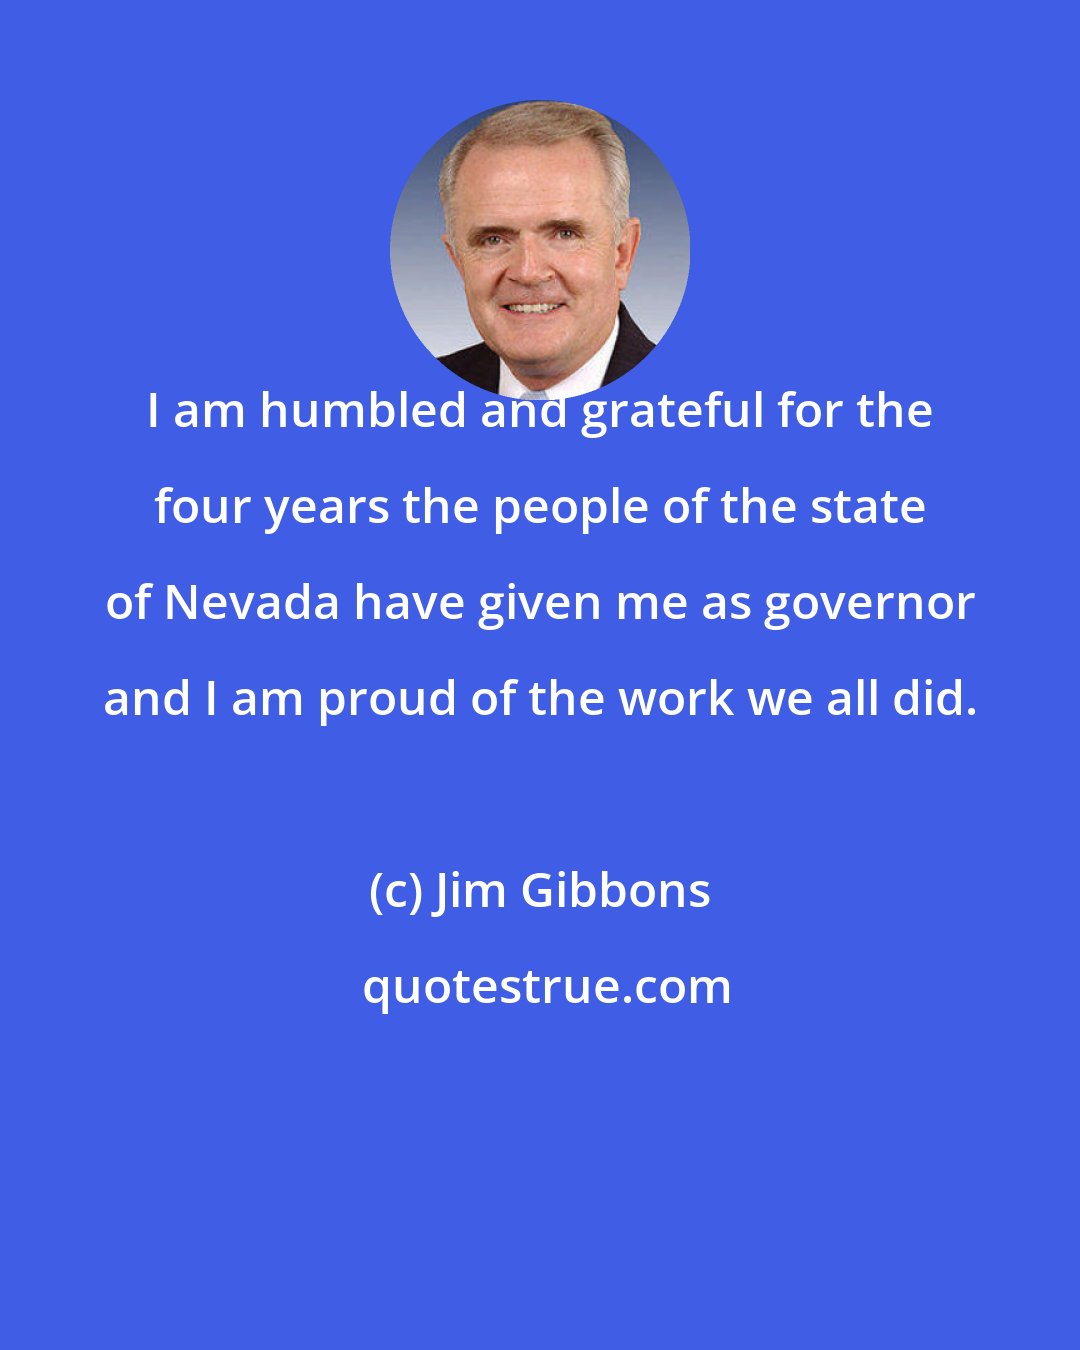 Jim Gibbons: I am humbled and grateful for the four years the people of the state of Nevada have given me as governor and I am proud of the work we all did.